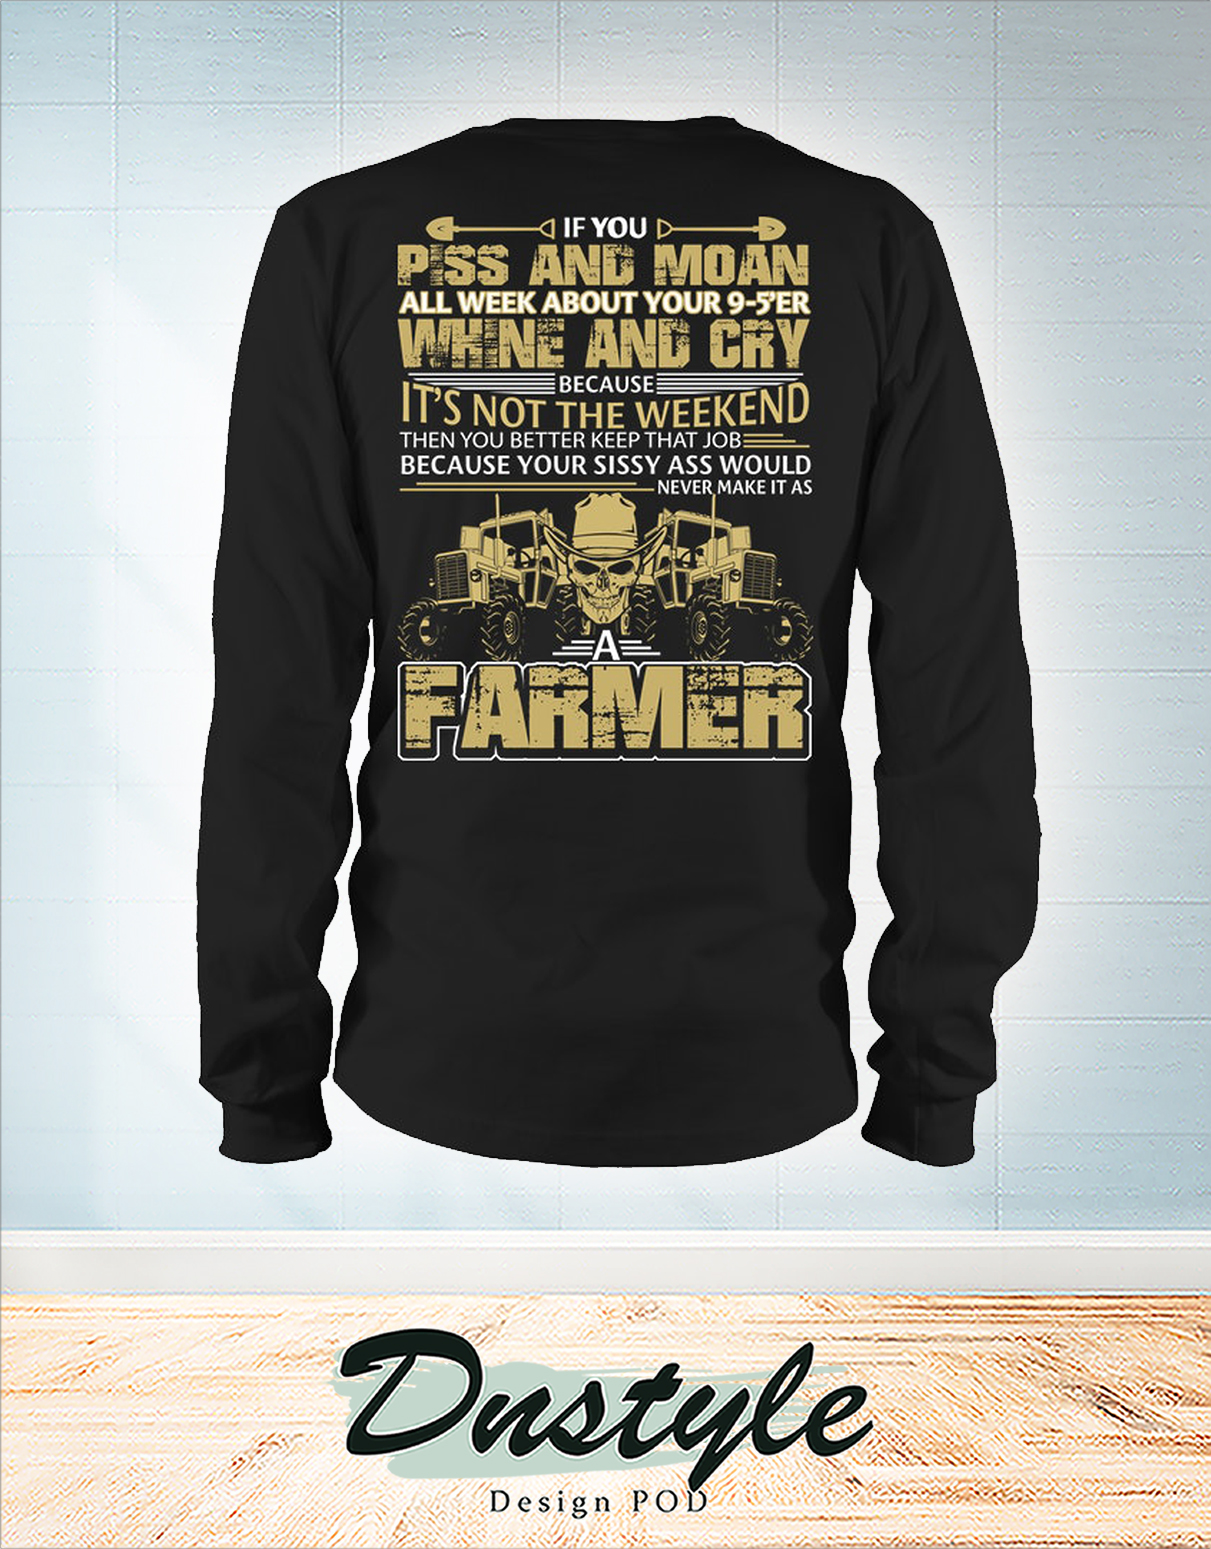 Skull Farmer if you piss and moan all week about your 9-5'er long sleeve